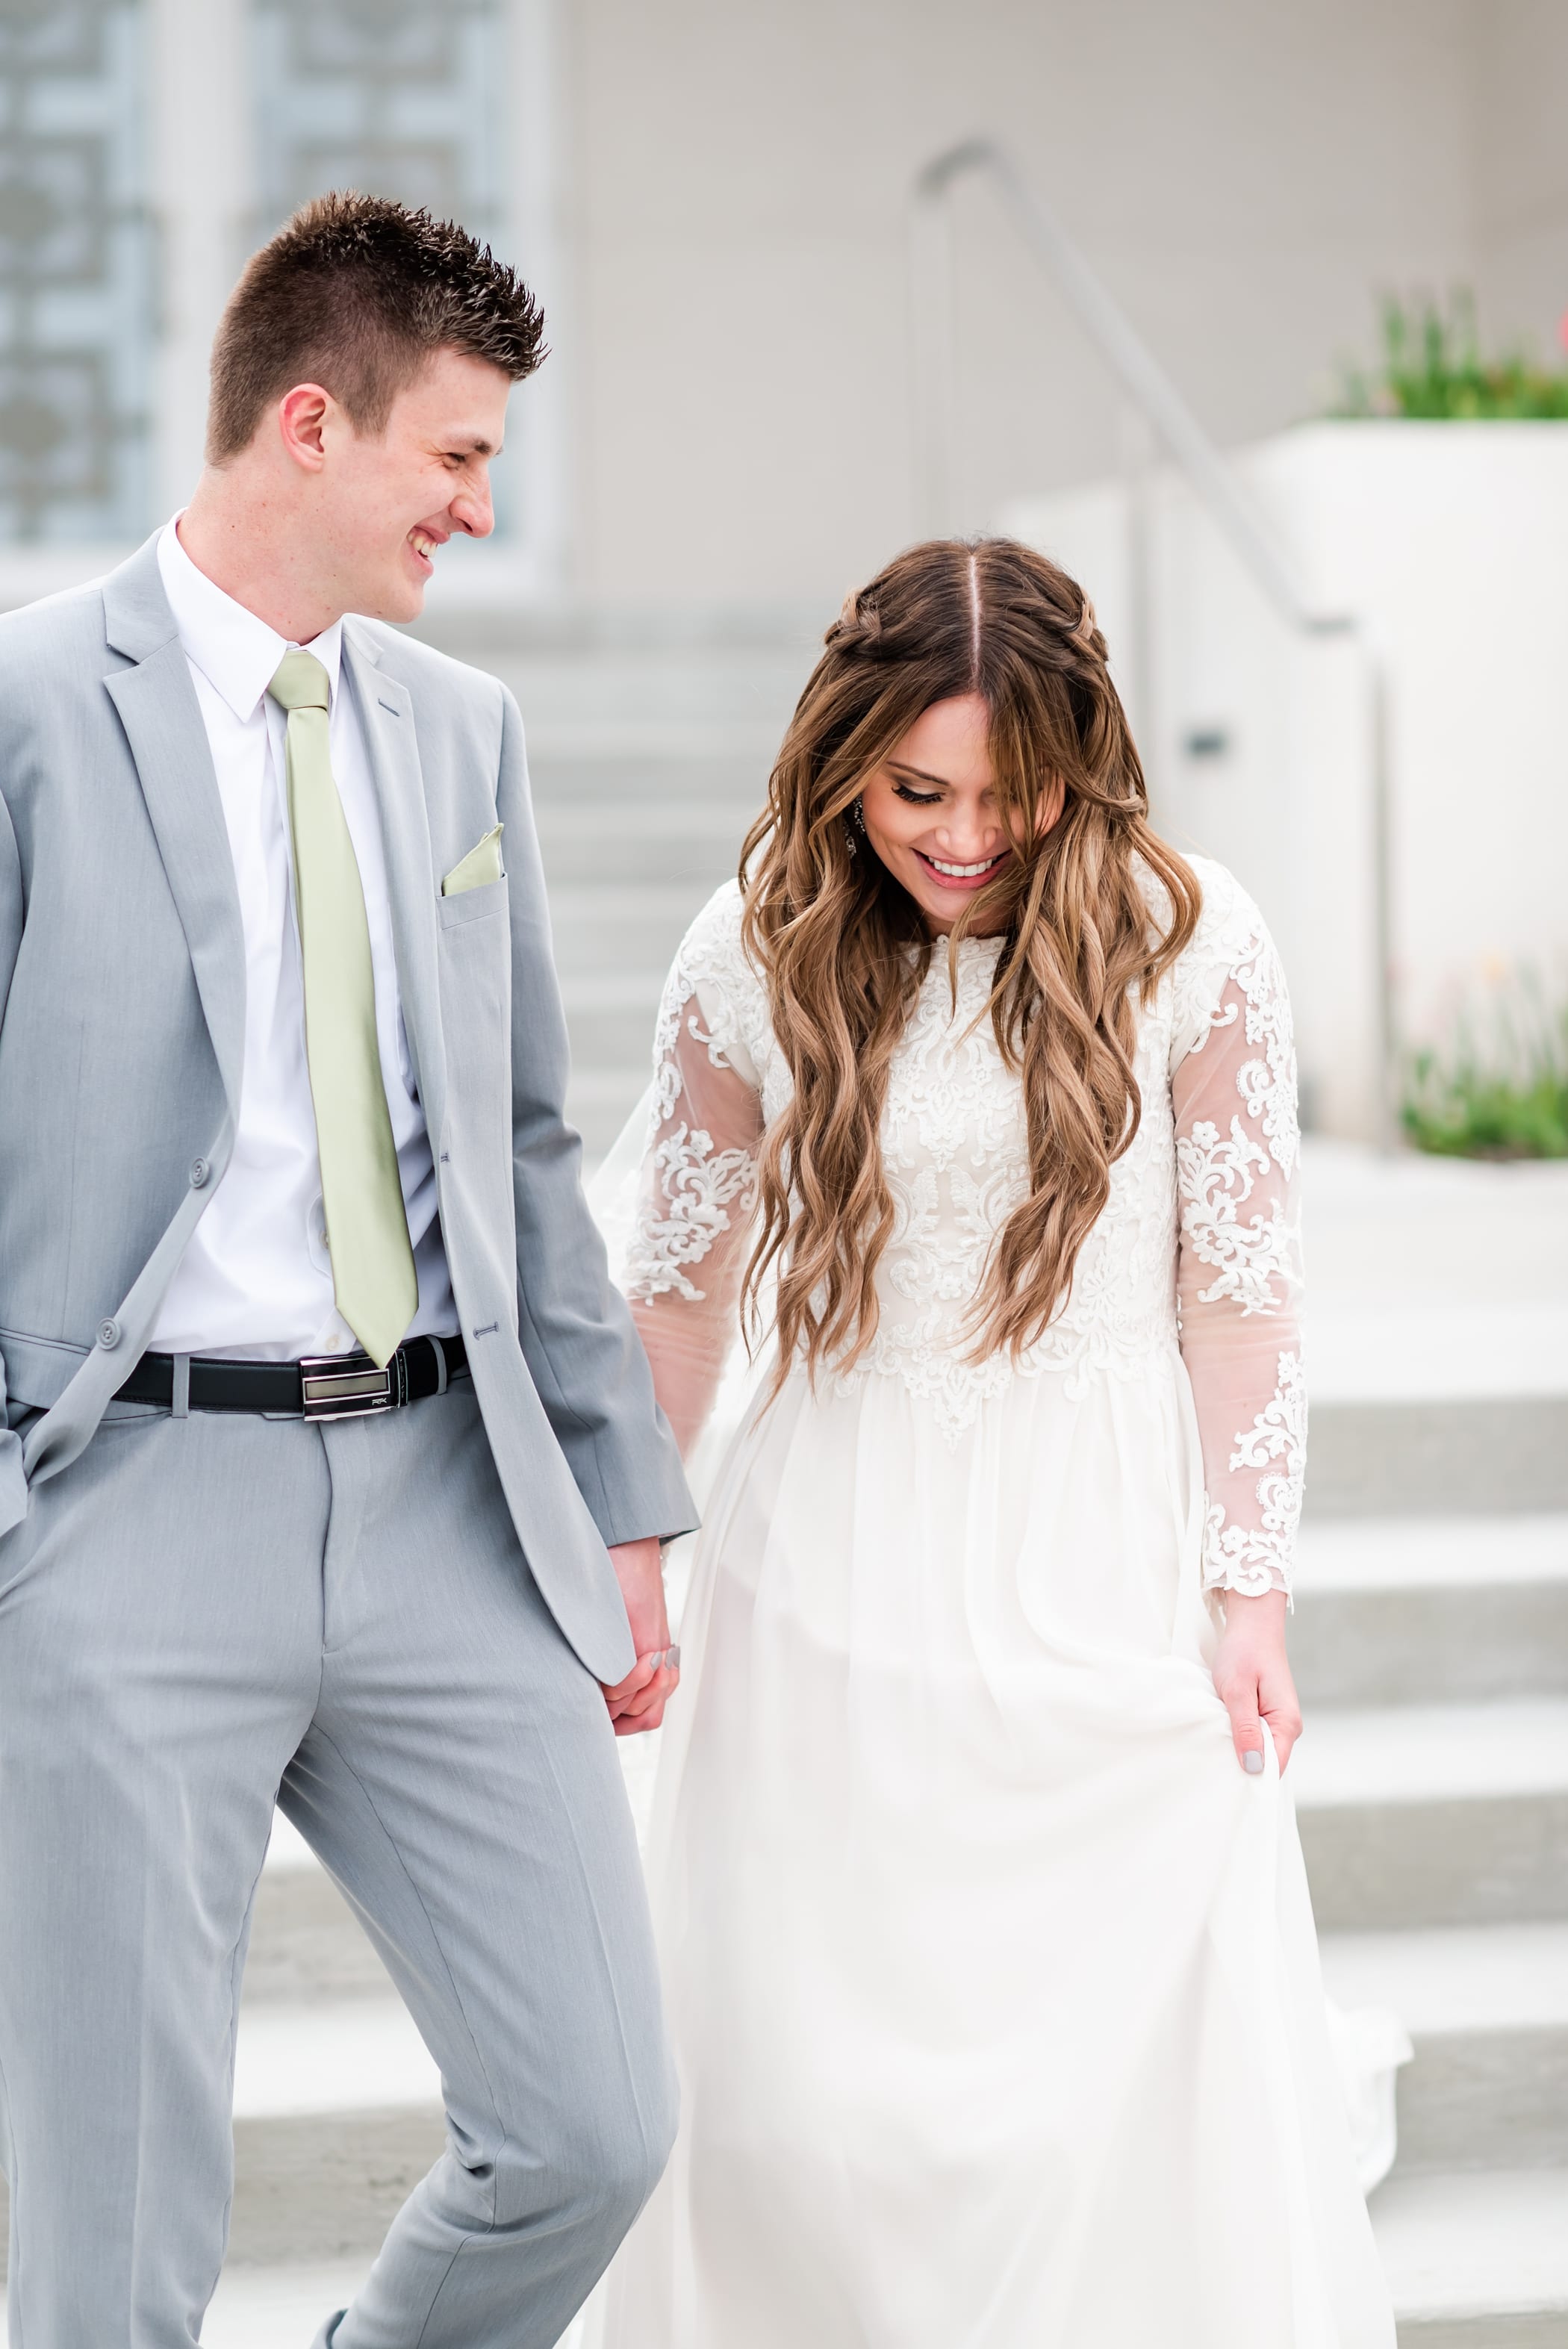 Wedding couple walking photo with laughter